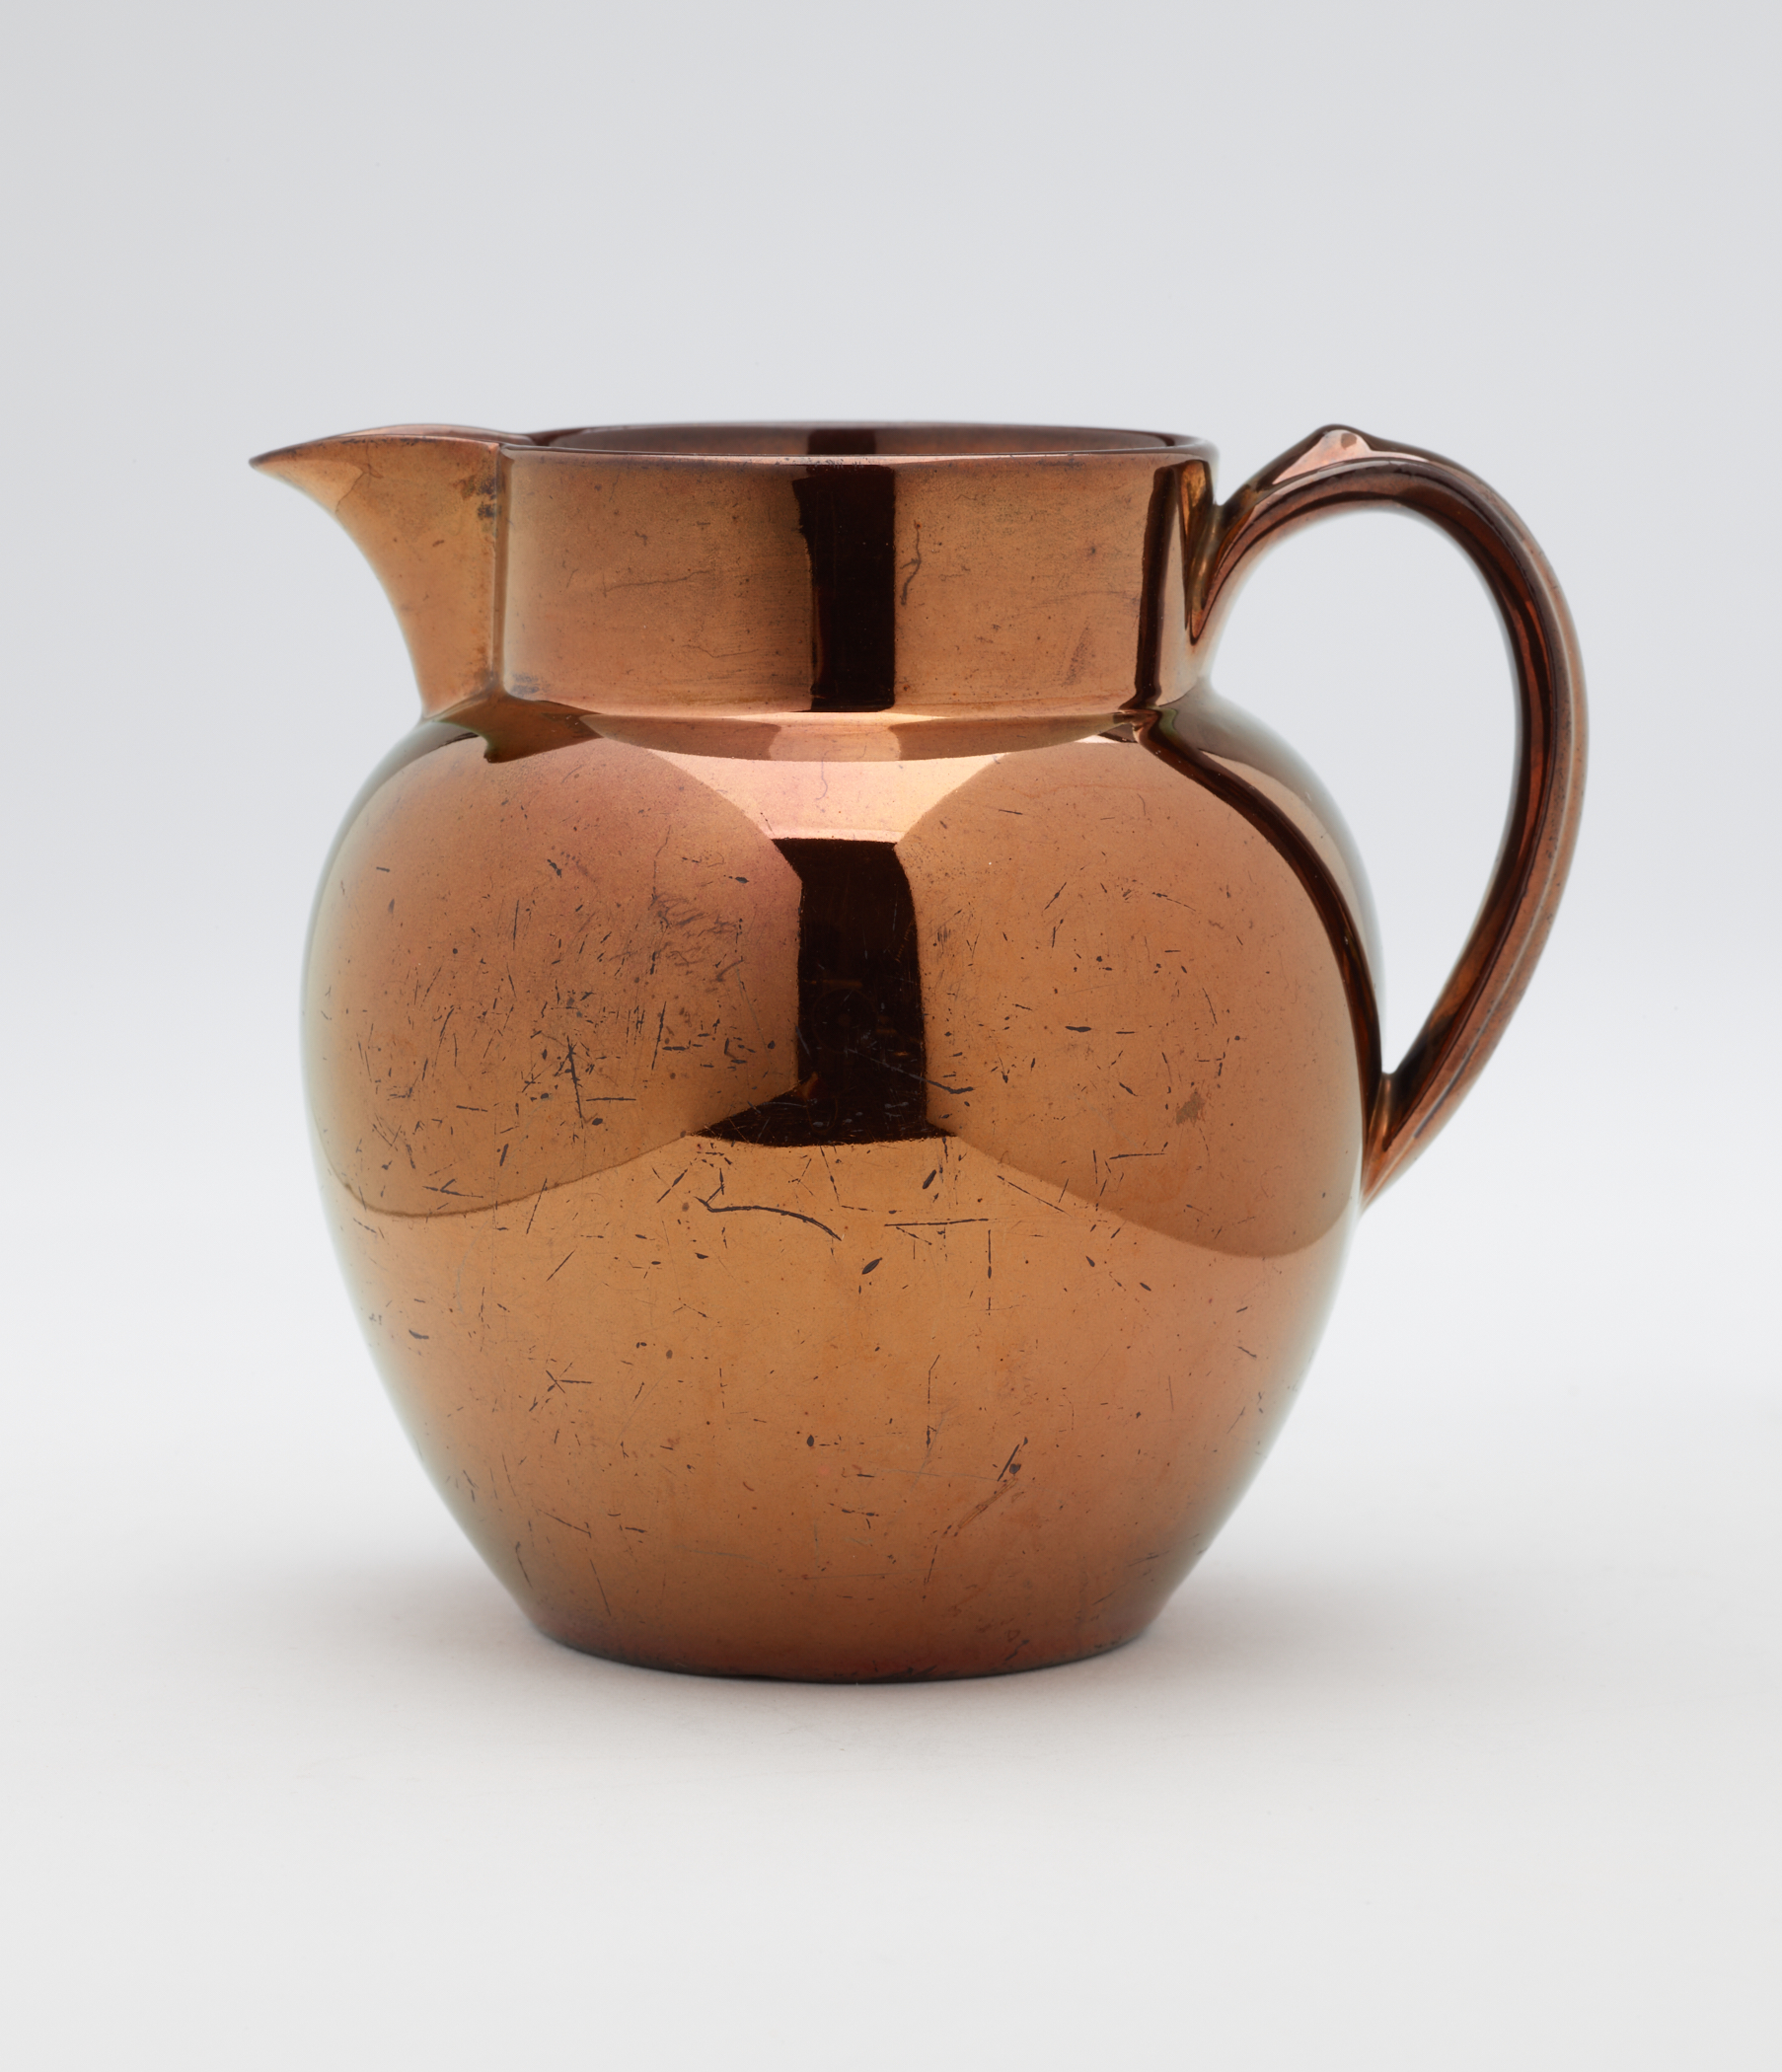 /A%20ceramic%20jug%20with%20a%20small%20handle.%20The%20glaze%20is%20a%20brown%20metallic%20color.